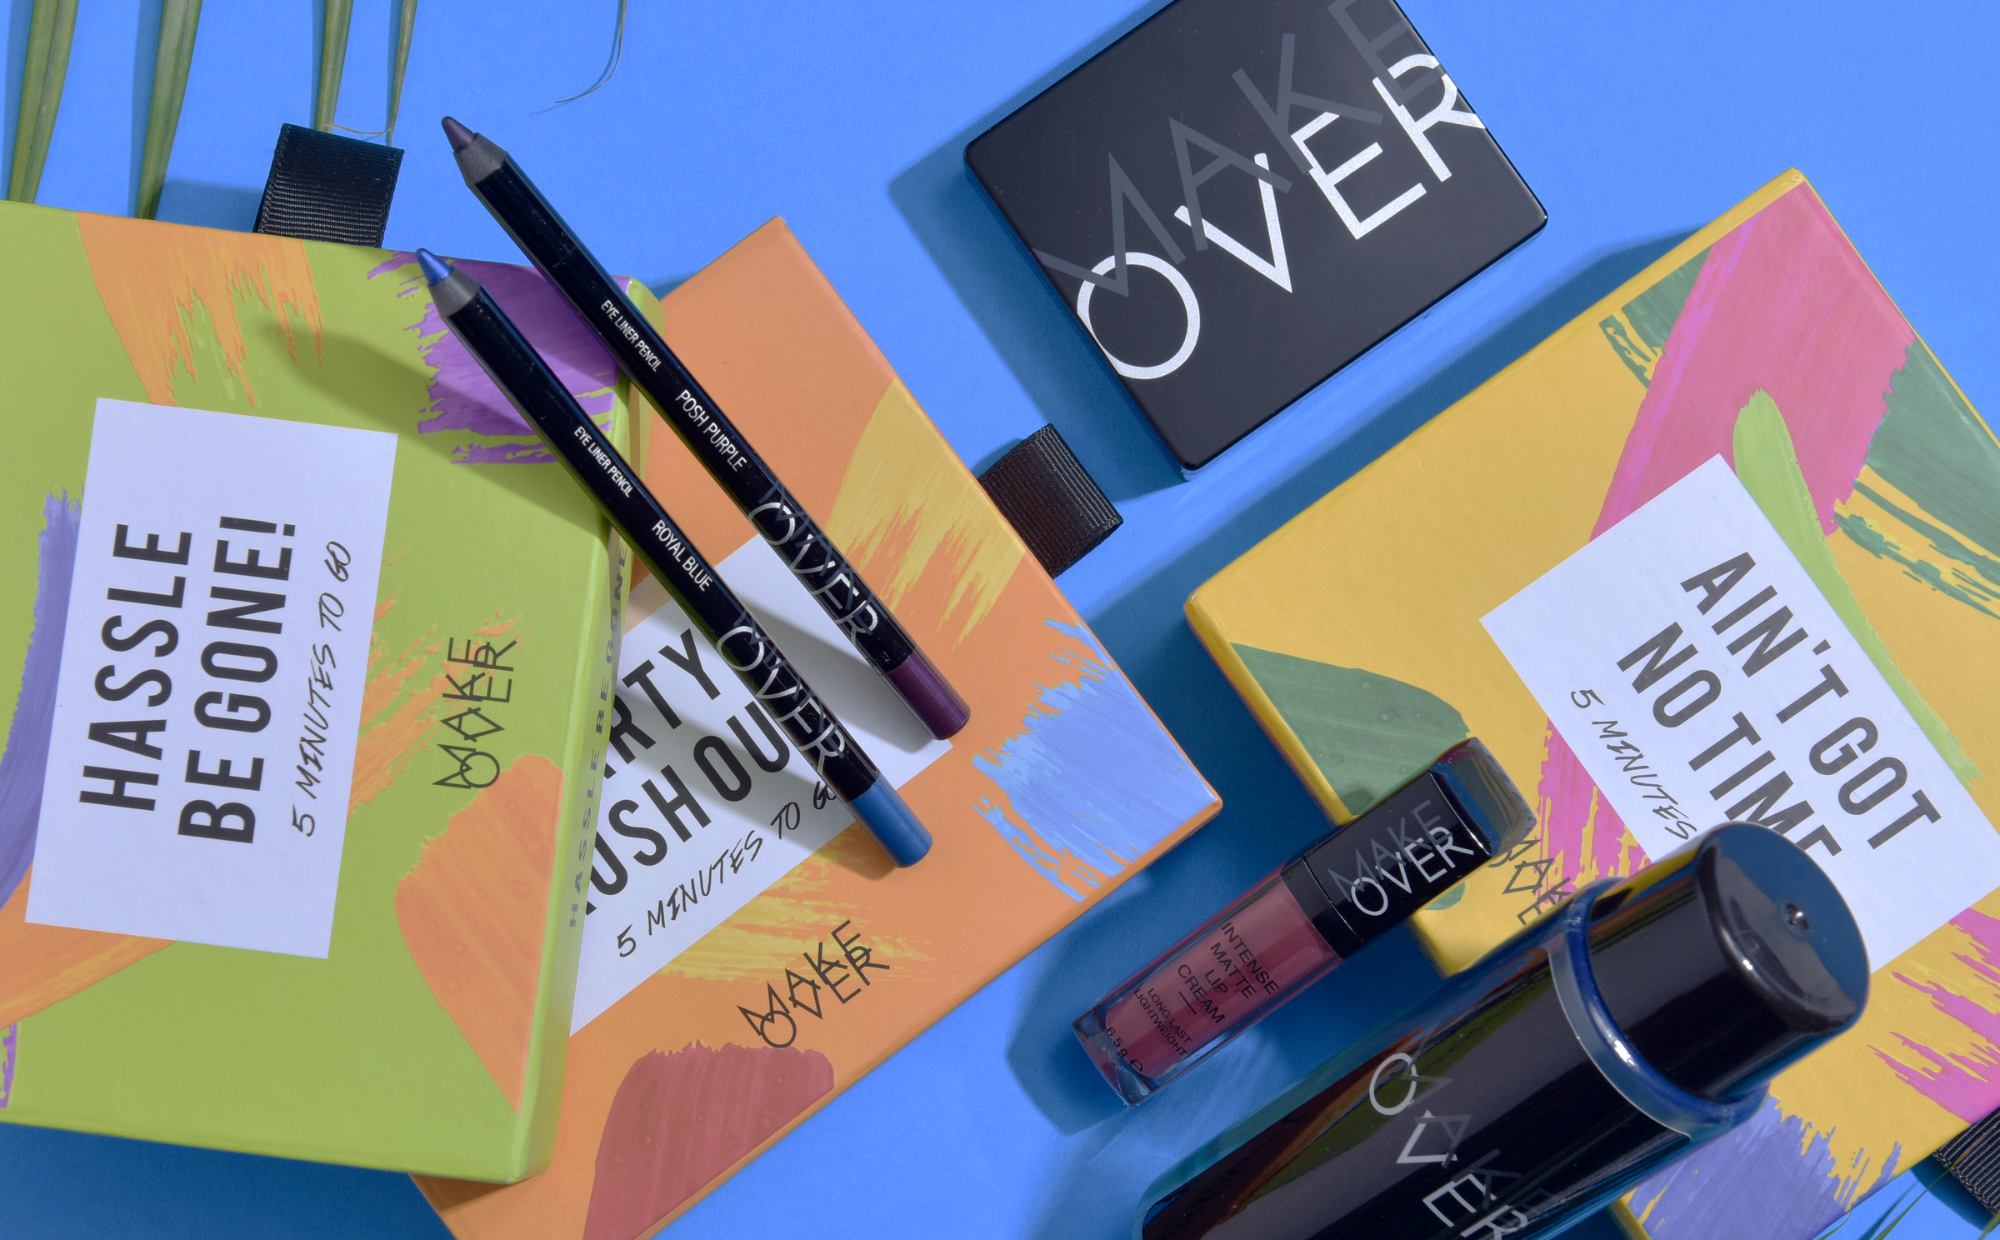 MakeOver Packaging